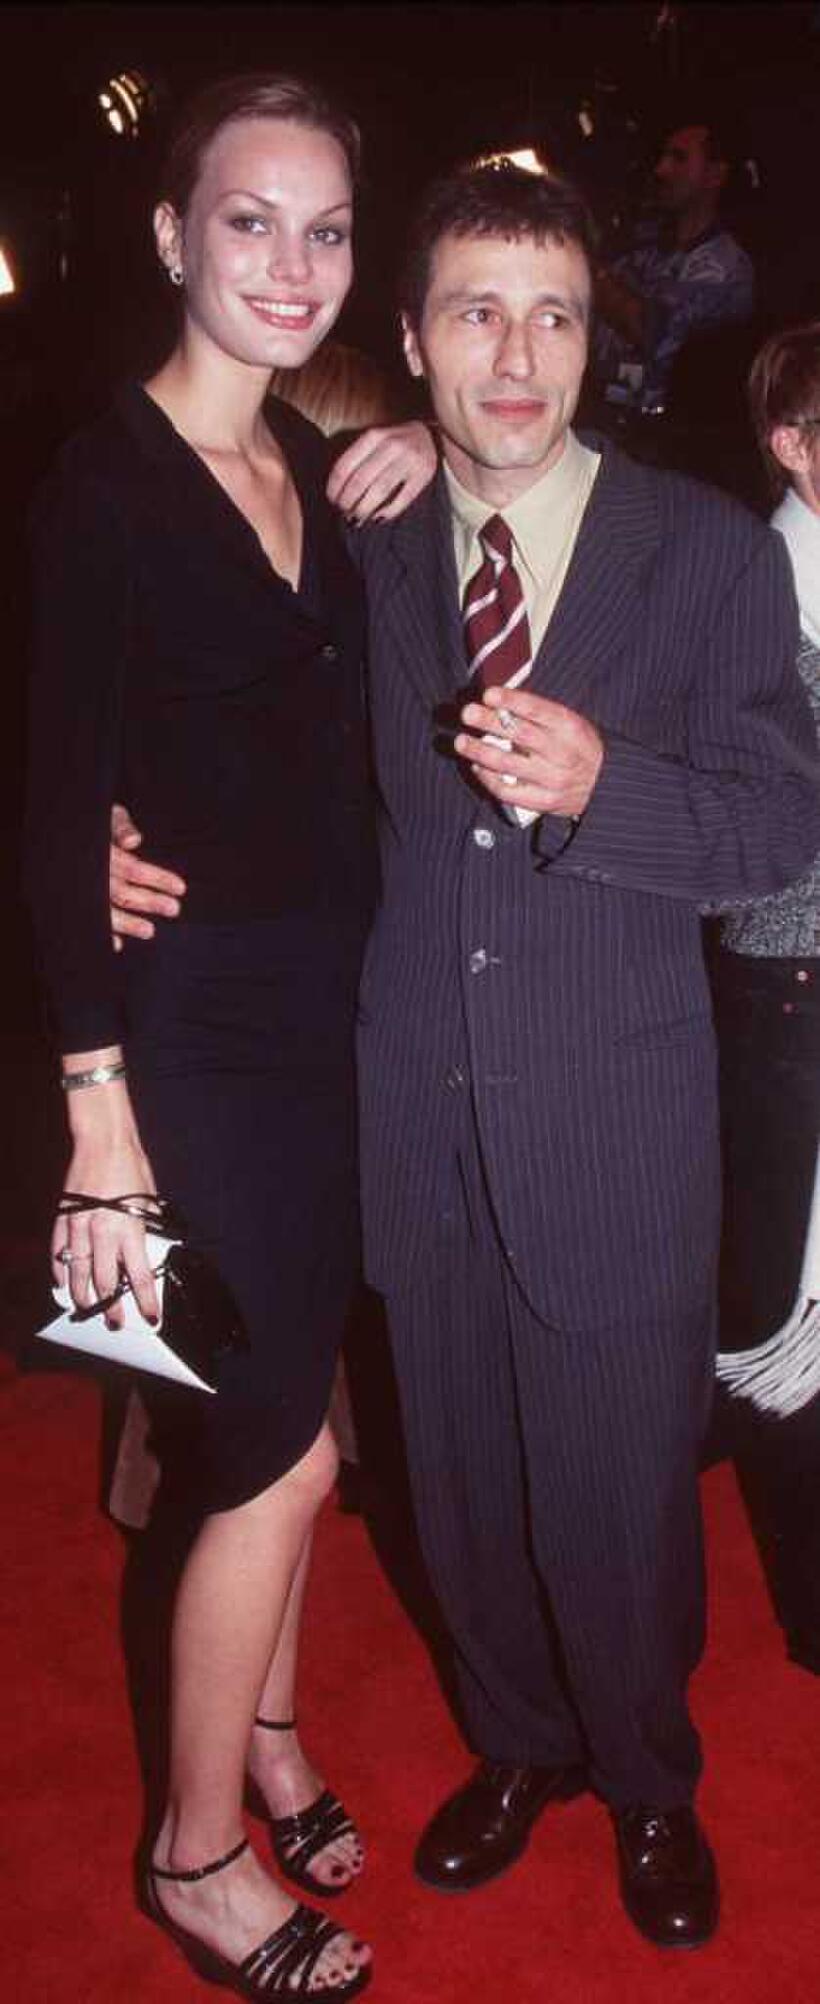 Michael Wincott and date at the premiere of "Alien Resurrection."